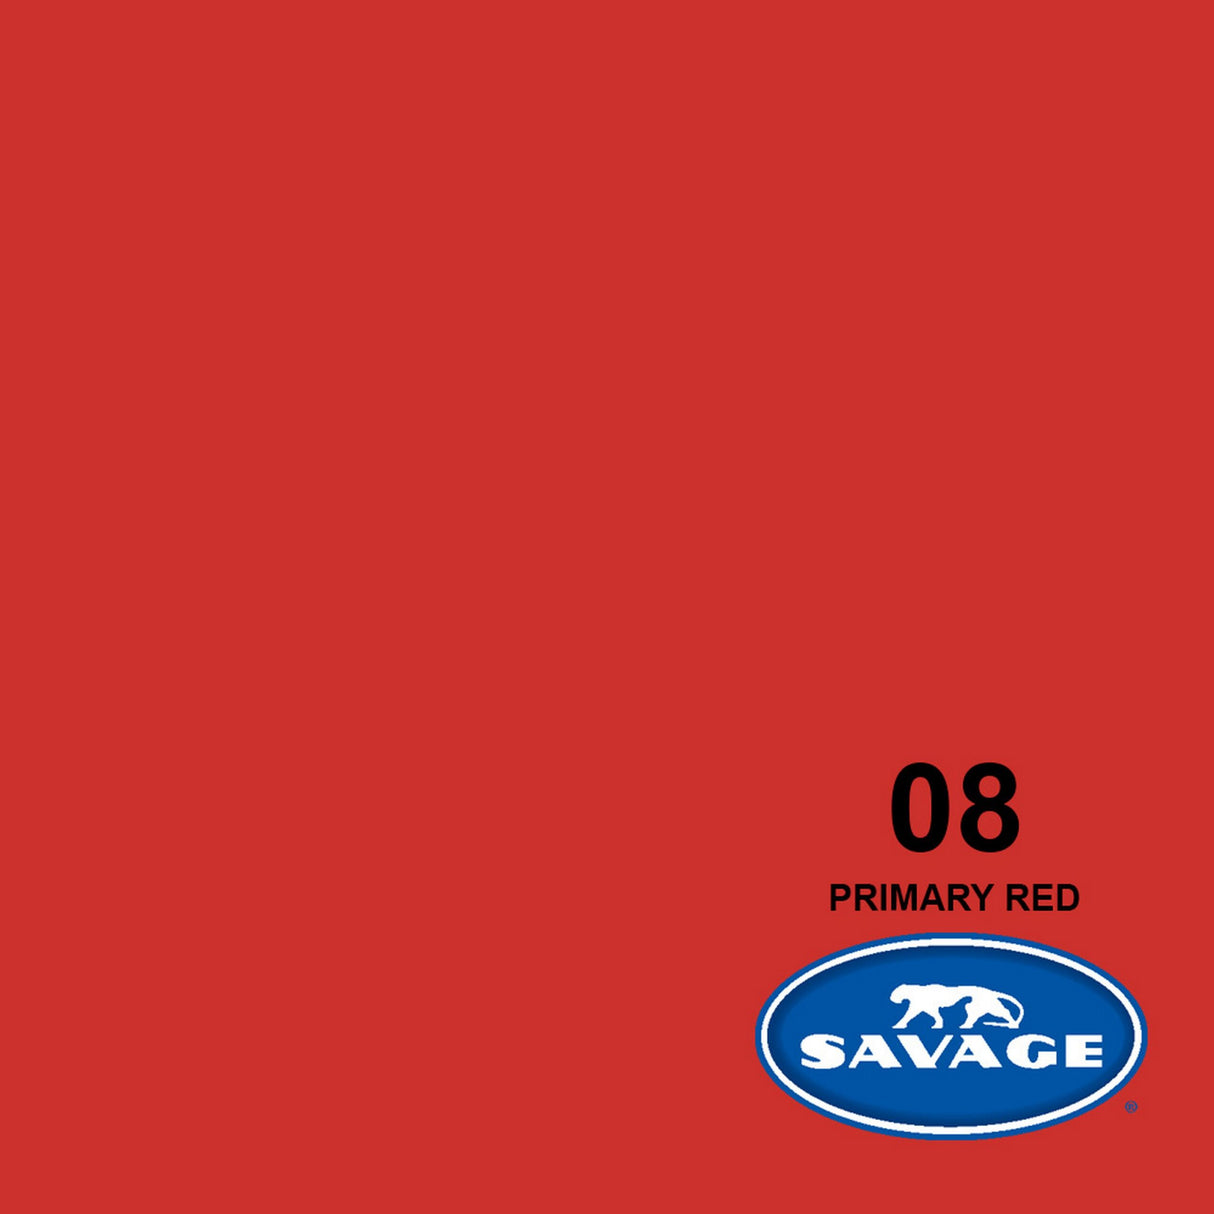 Savage 8-2612 26-Inch x 12-Yards Widetone Seamless Background Paper, Primary Red